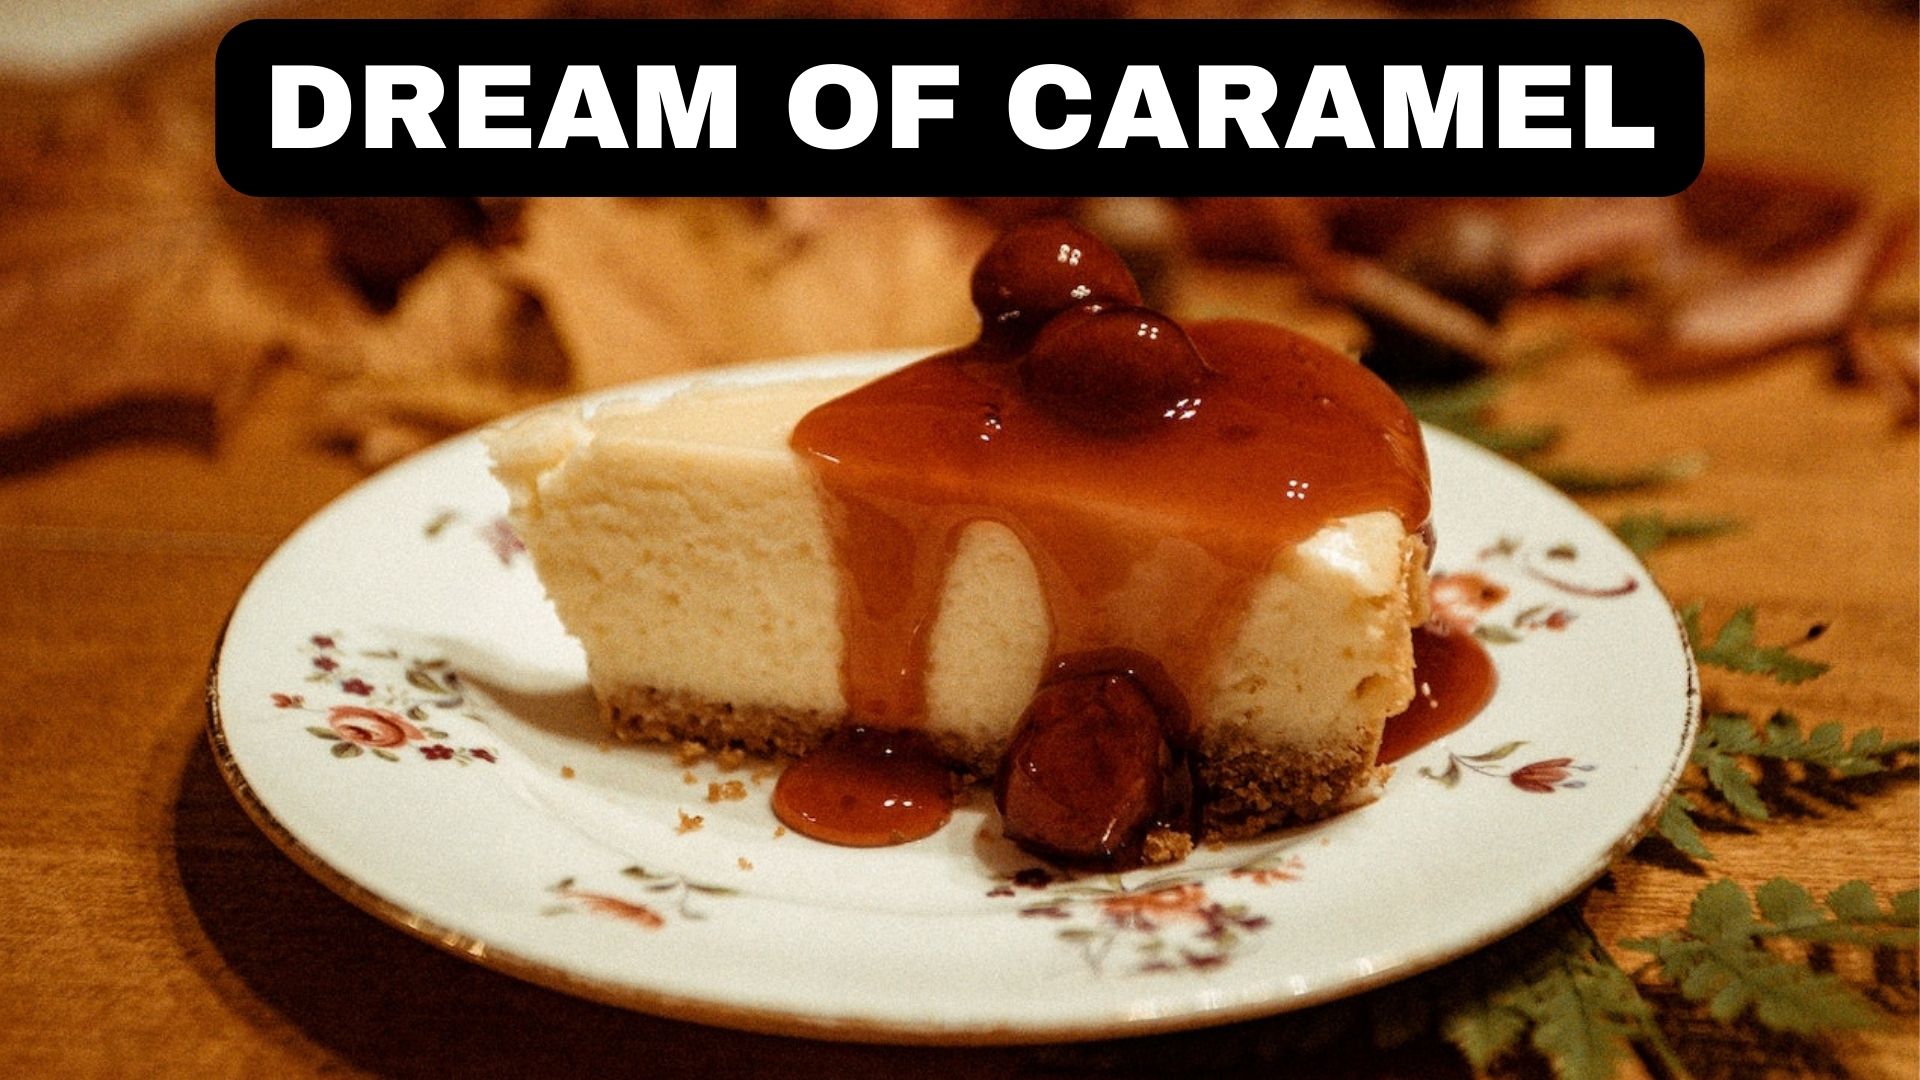 Dream Of Caramel Meaning - Focus On Important Things